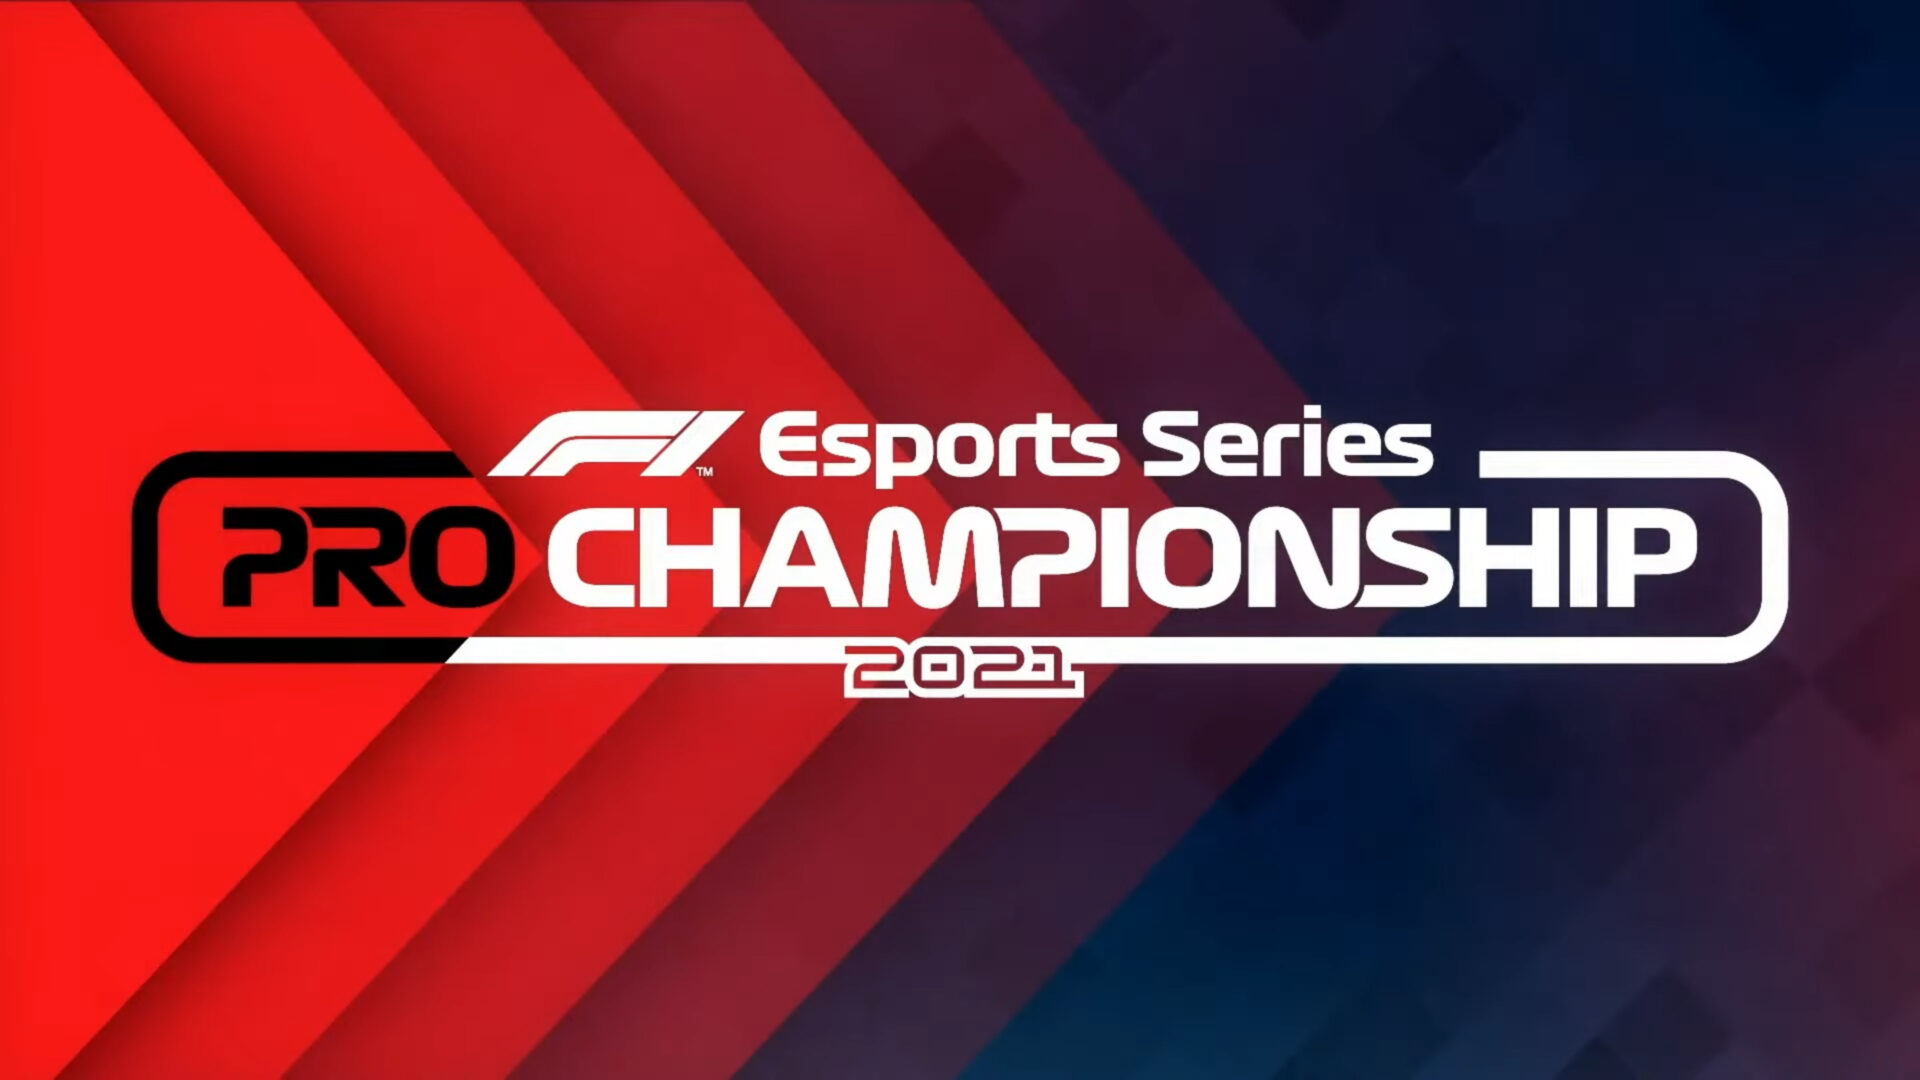 F1 Esports Series Pro Championship 2021 Drivers and Schedule Revealed